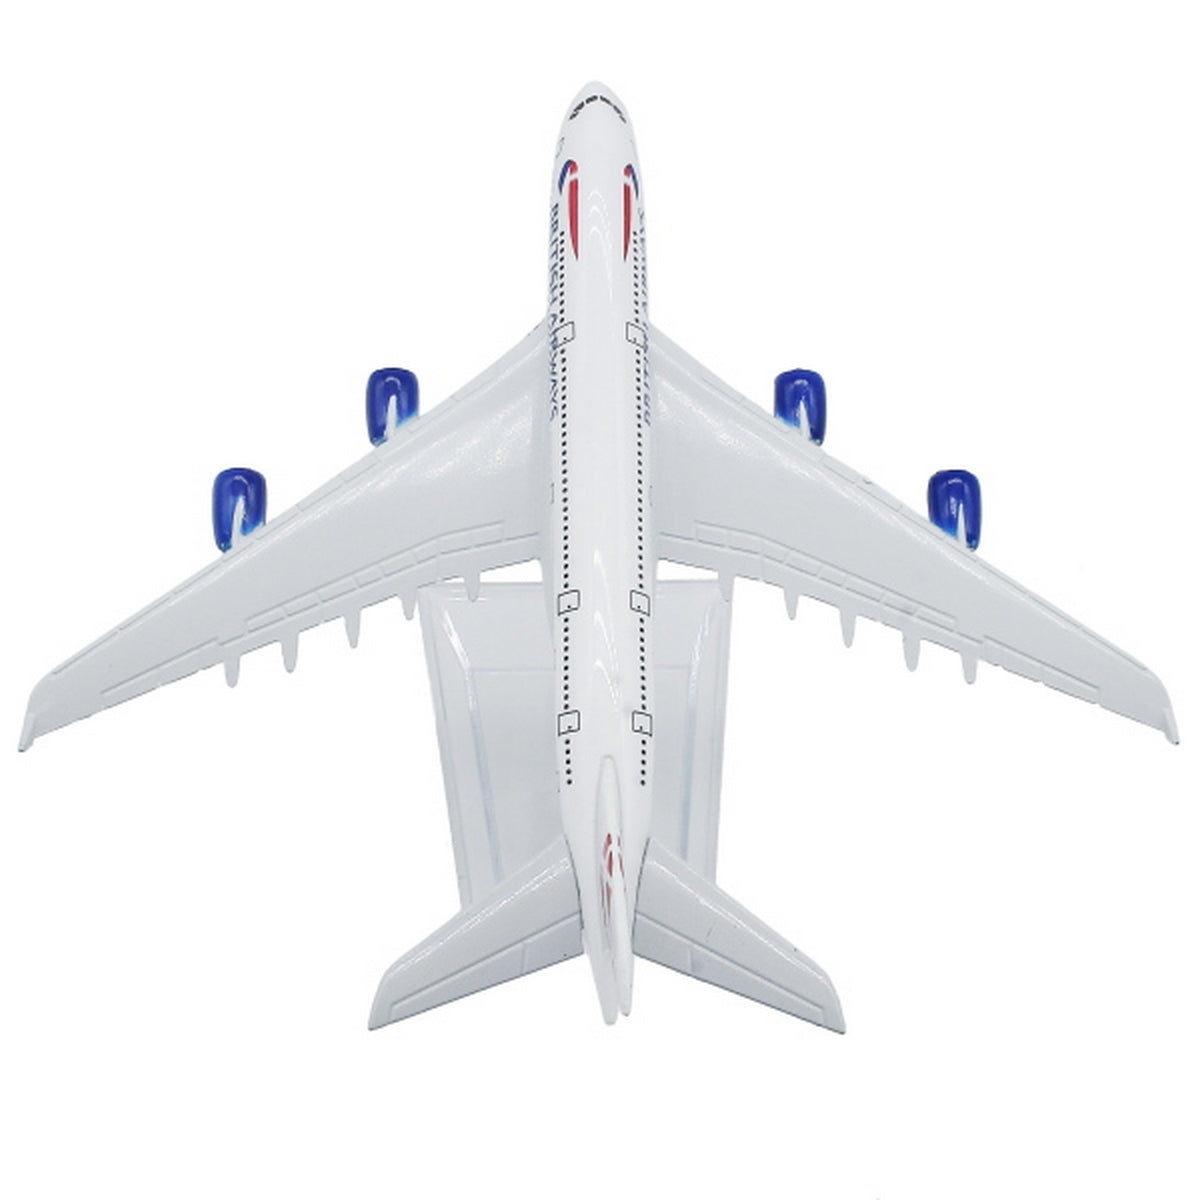 Aircraft Model Small British Airways - For Office Use, Personal Use, or Corporate Gifting